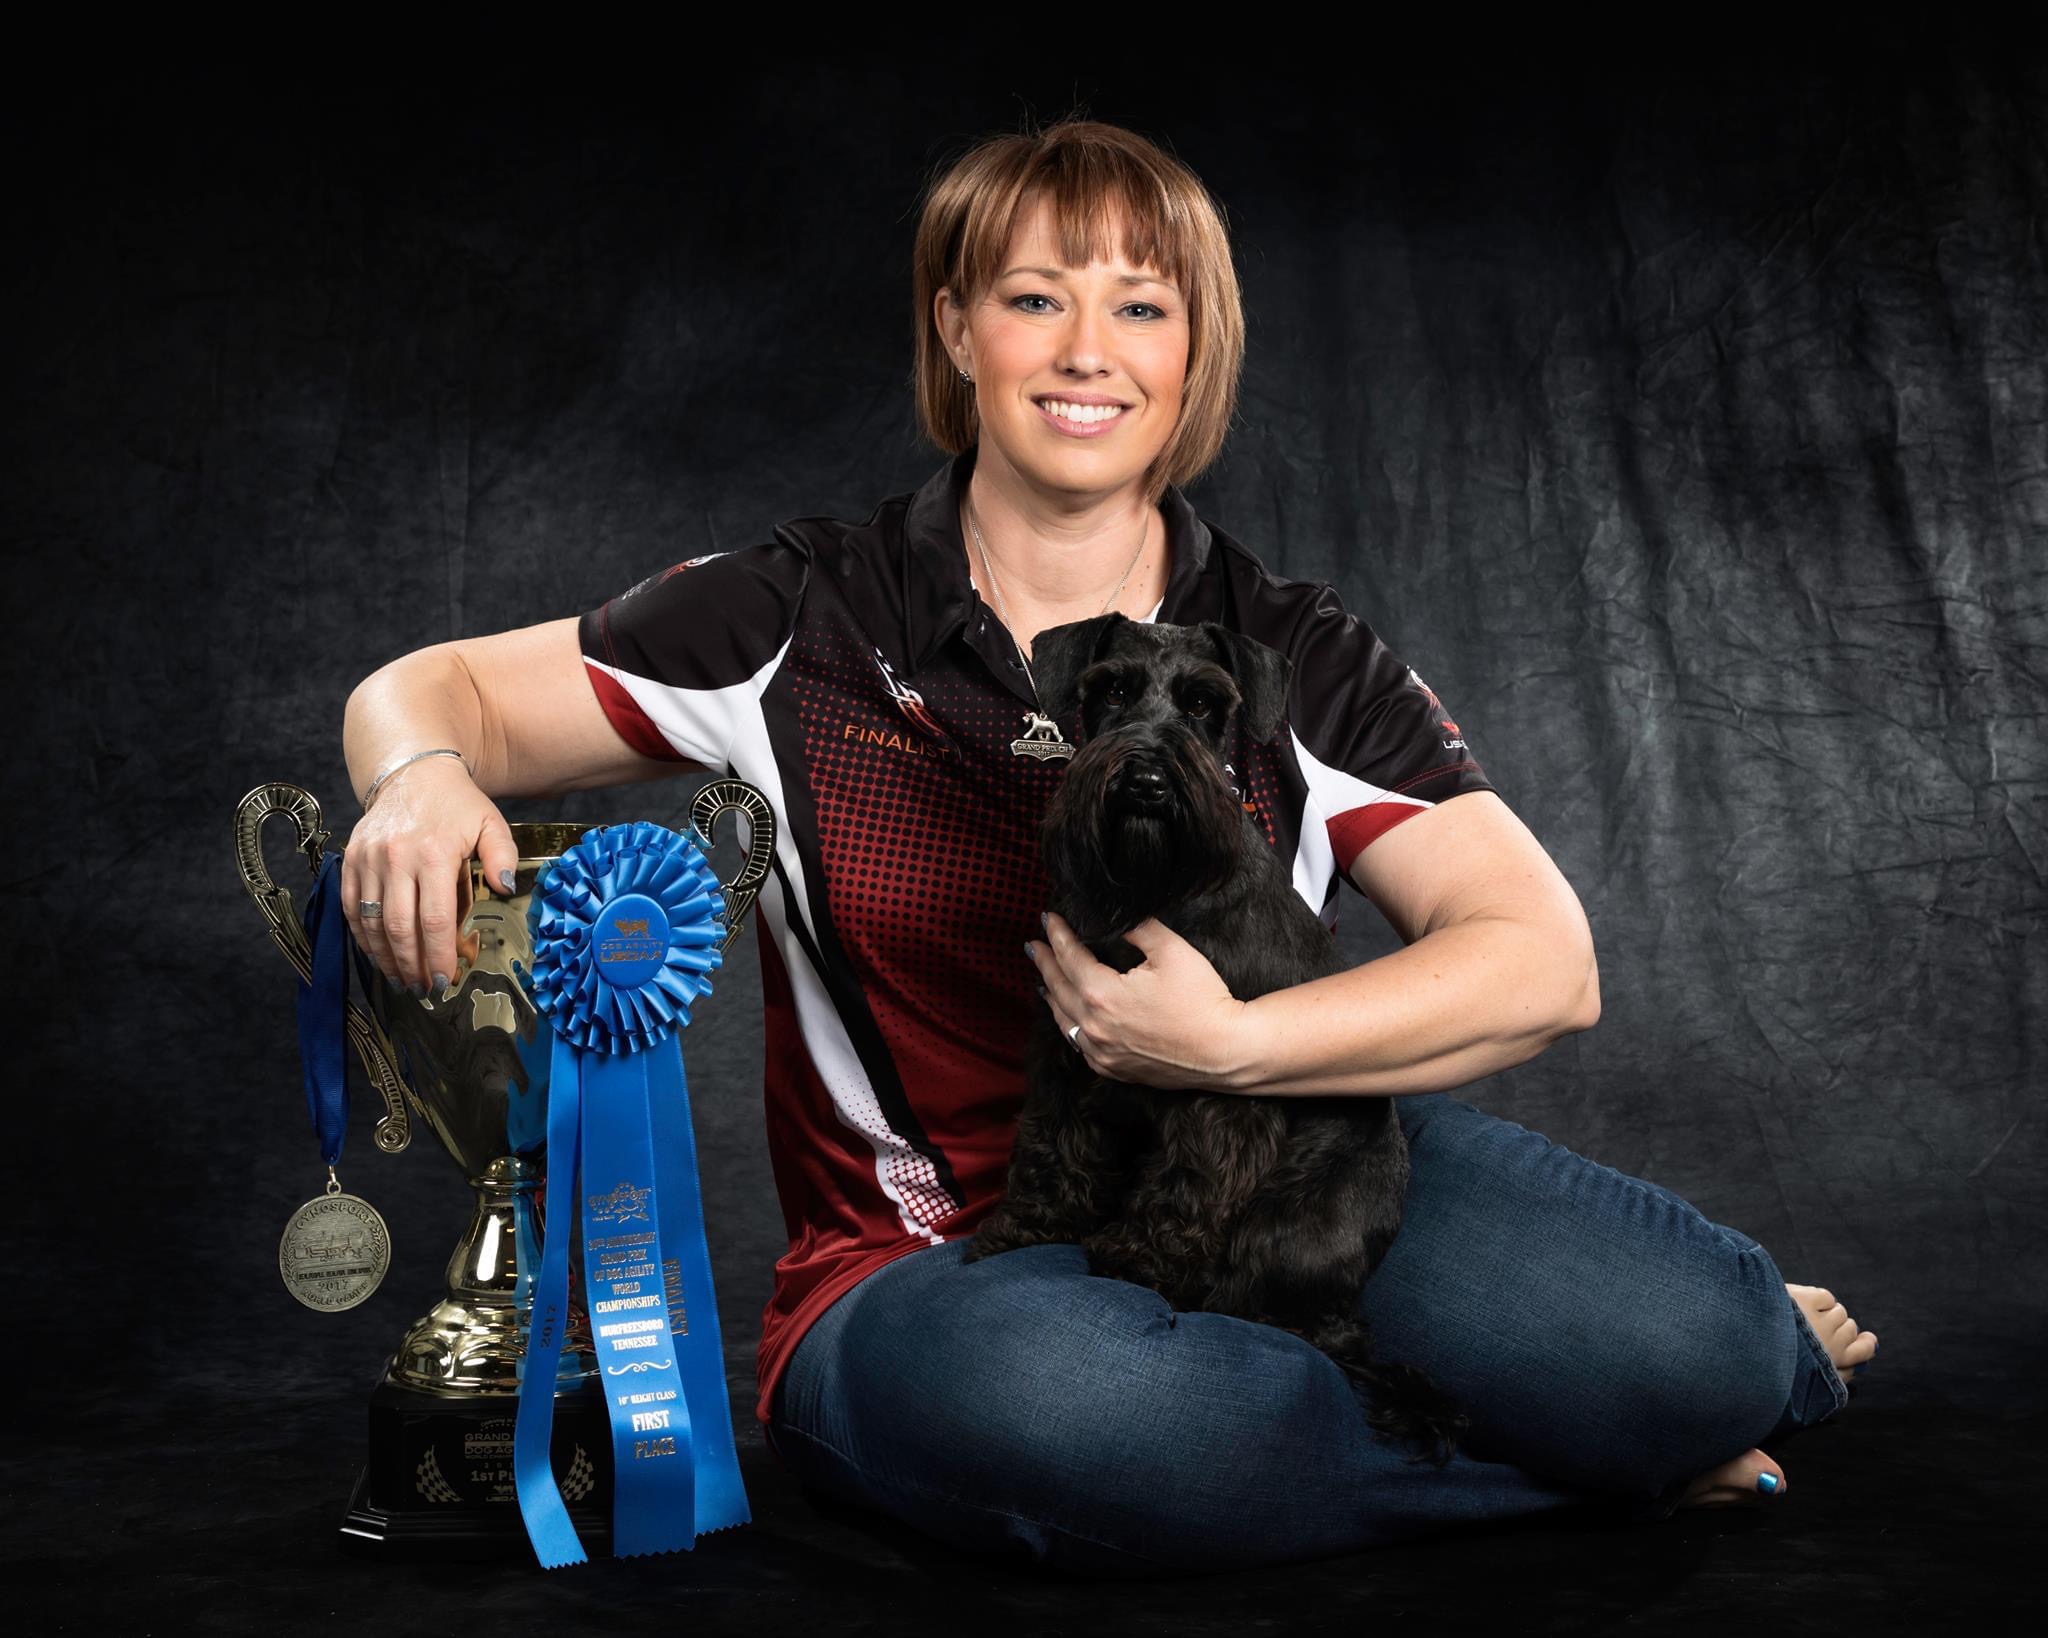 Woman with chin length brown hair smiling towards camera holding a black mini schnauzer and leaning on a large trophy, blue ribbon and medal